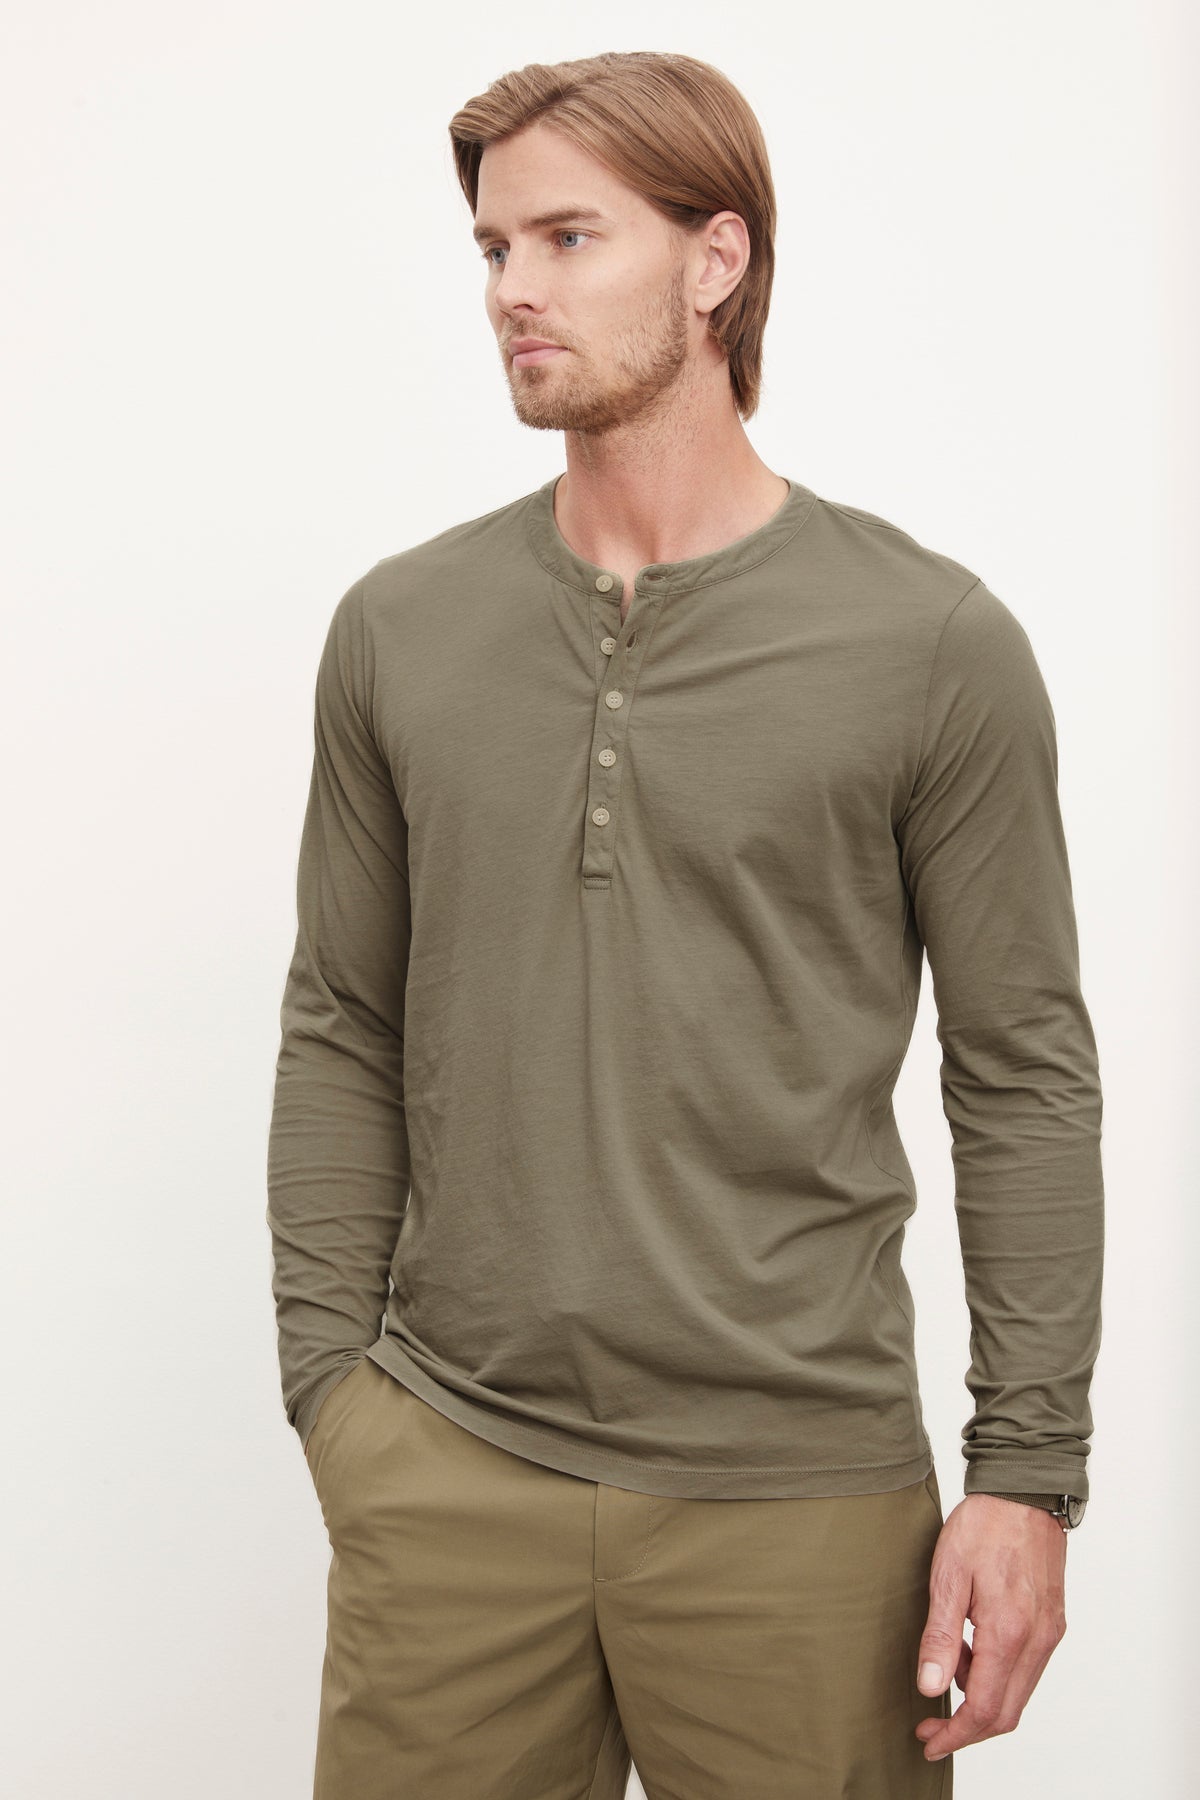   A man with medium-length hair stands wearing the Velvet by Graham & Spencer ALVARO HENLEY, a lightweight, long-sleeve olive green shirt with a buttoned henley neckline, and khaki pants. 